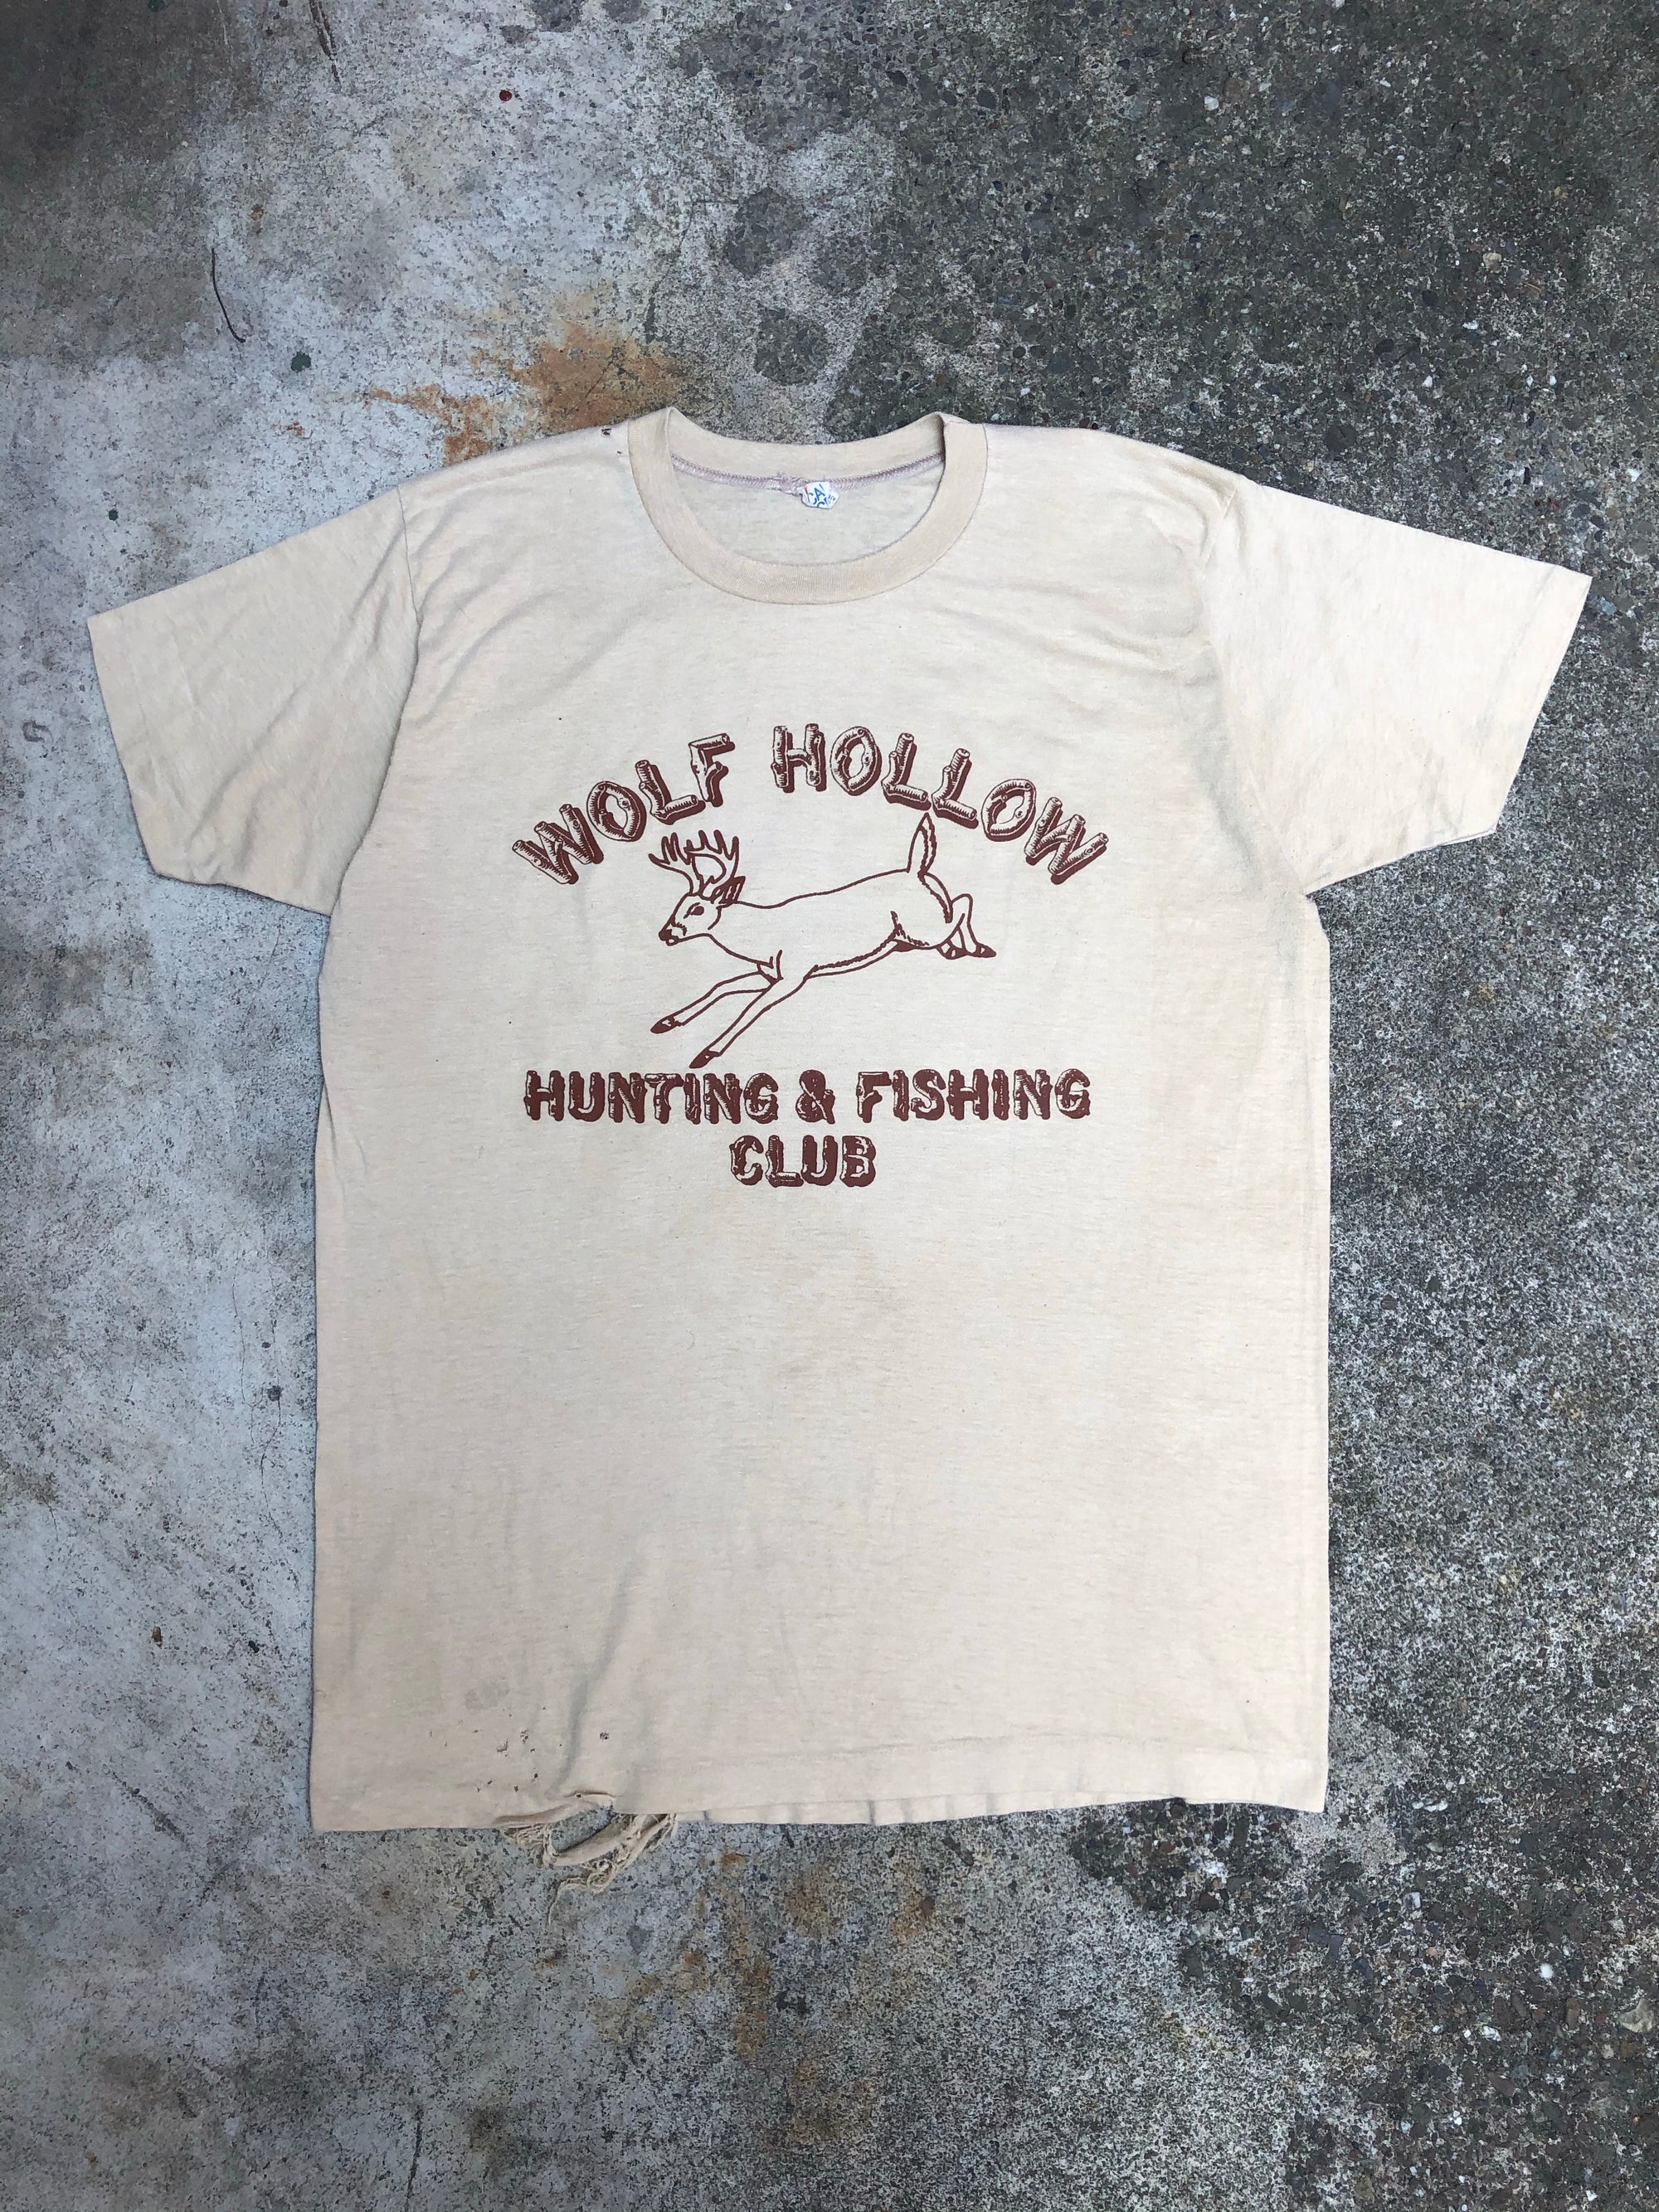 1980s Single Stitched “Wolf Hollow Hunting & Fishing Club” Tee